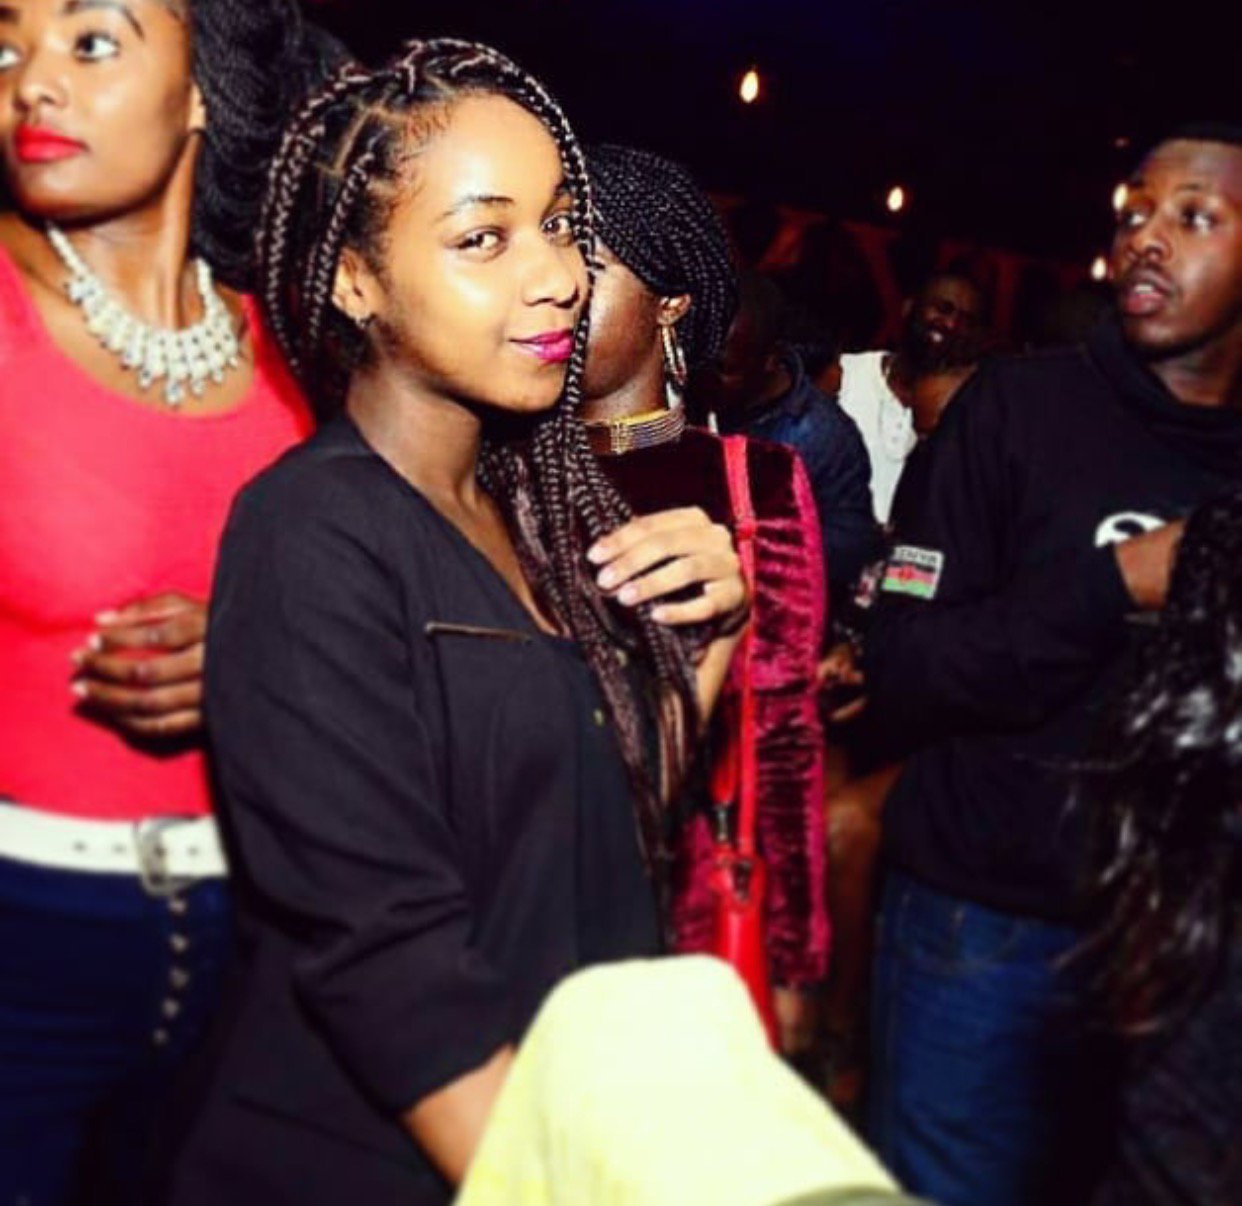 Socialite Vanessa Chettle shocks many after unveiling a photo taken while 5 months pregnant